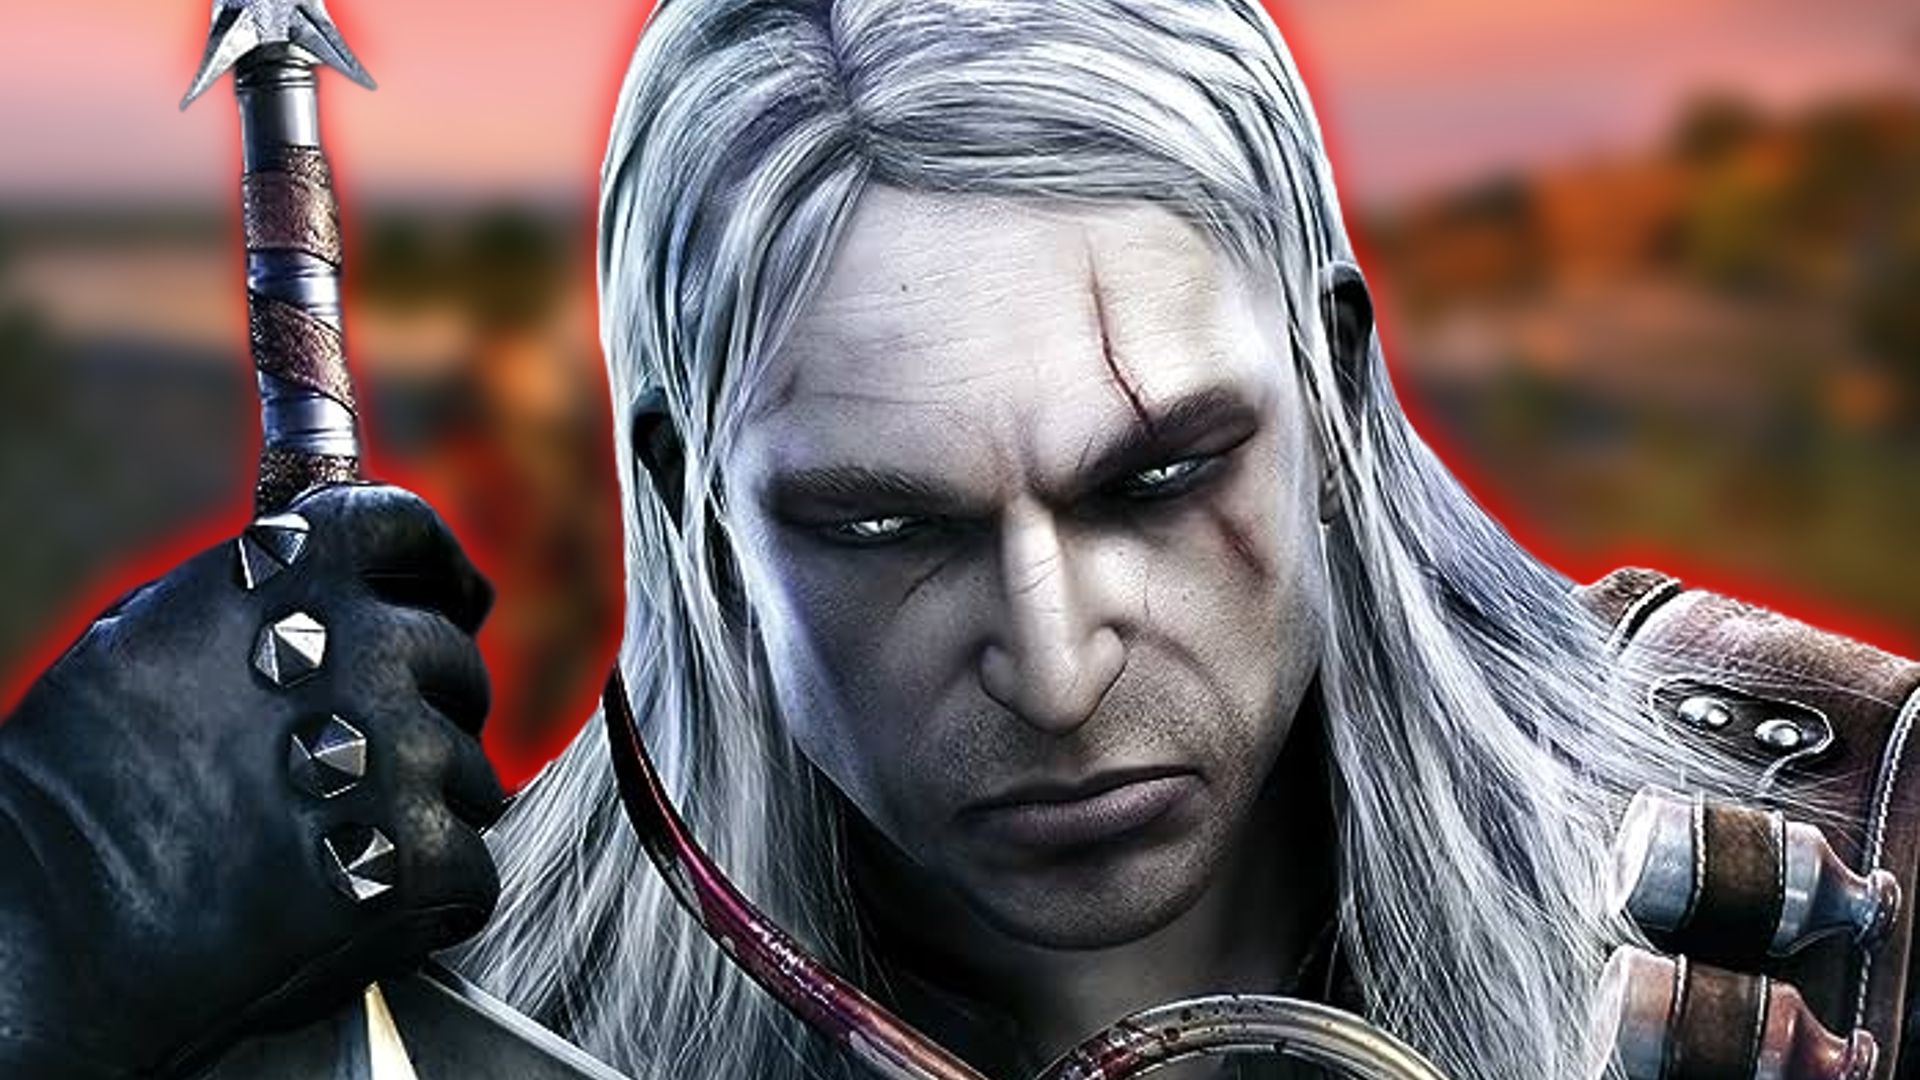 The Witcher Remake 